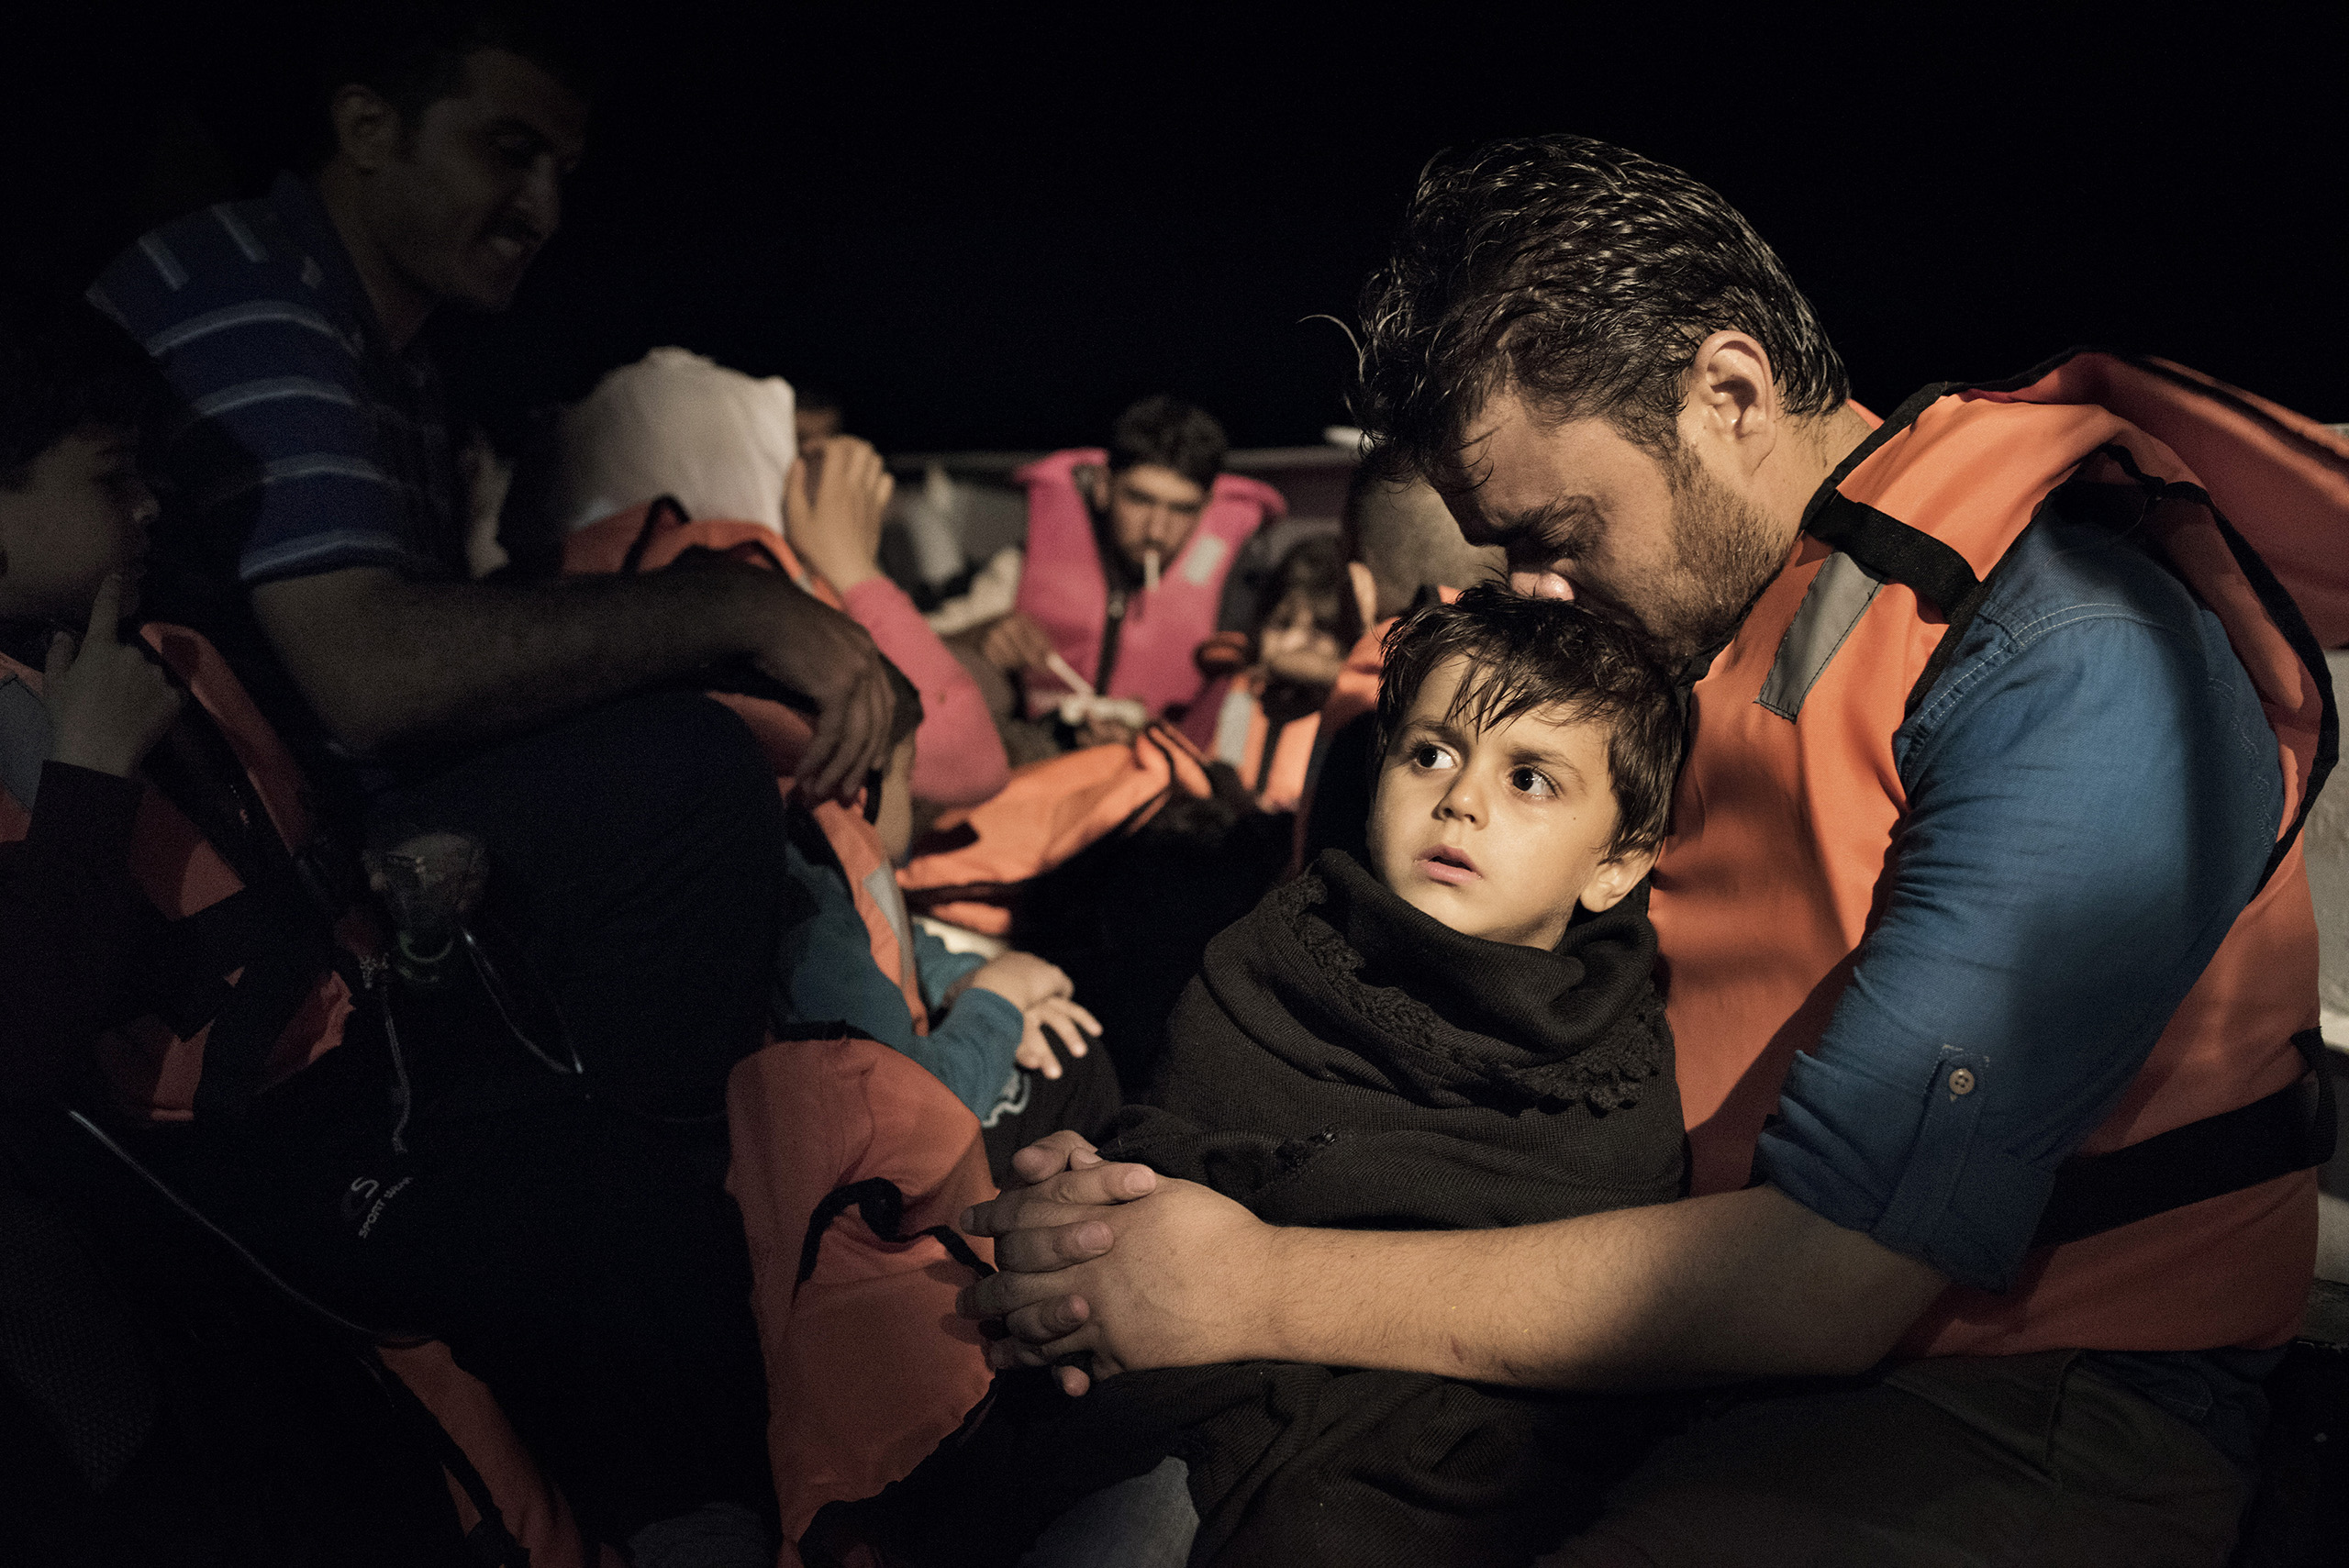 A Syrian migrant comforts his child aboard a Greek coast guard vessel that has just rescued them from an overcrowded motorboat in the waters near the Greek-Turkish border. Sept. 6, 2015.